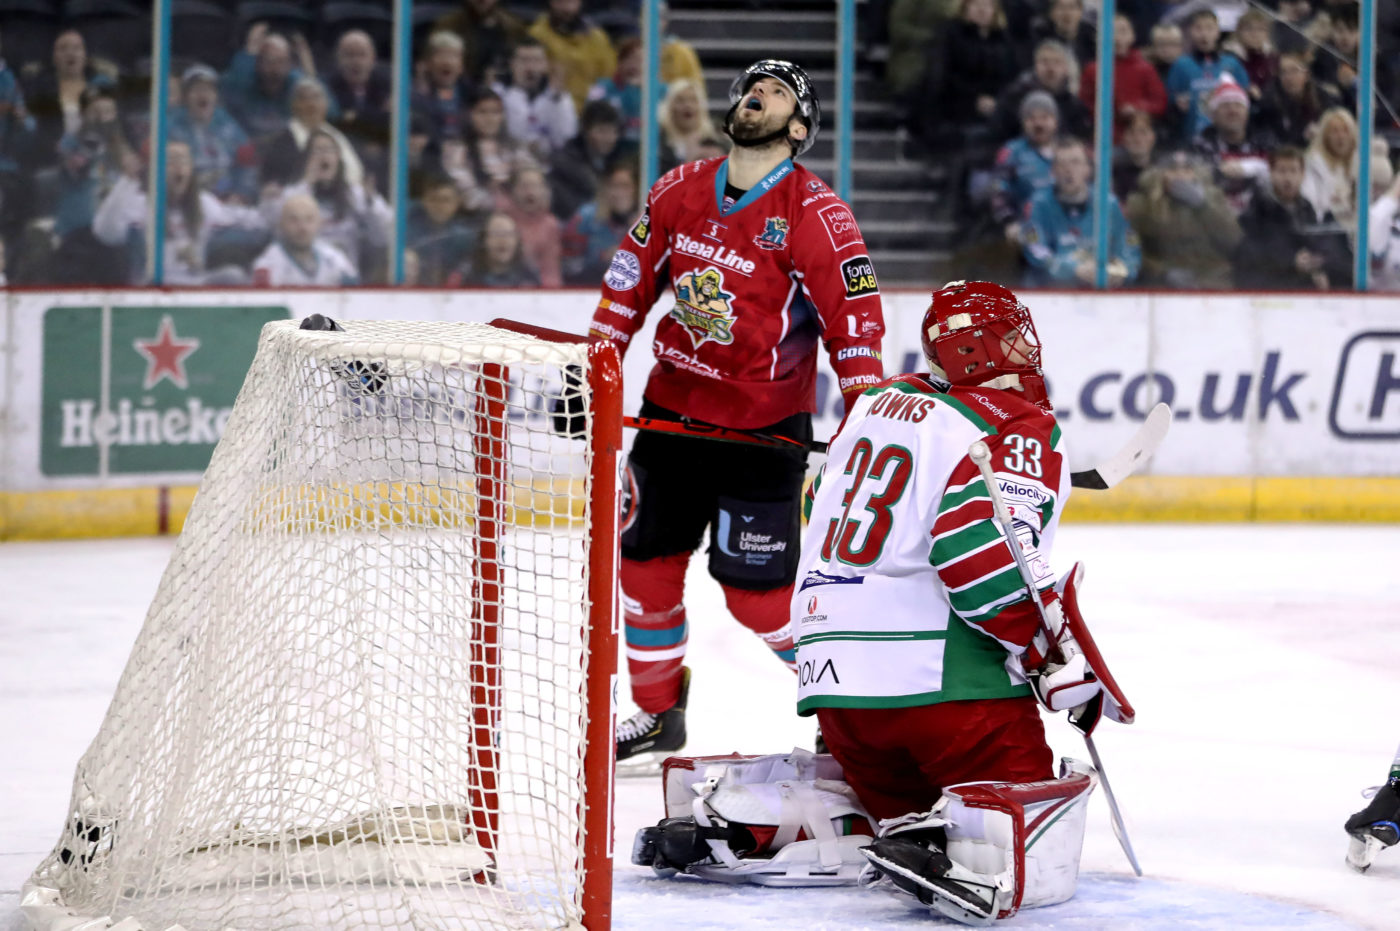 Cardiff Cup Win Leaves Giants Shut Out In Back To Back Home Games